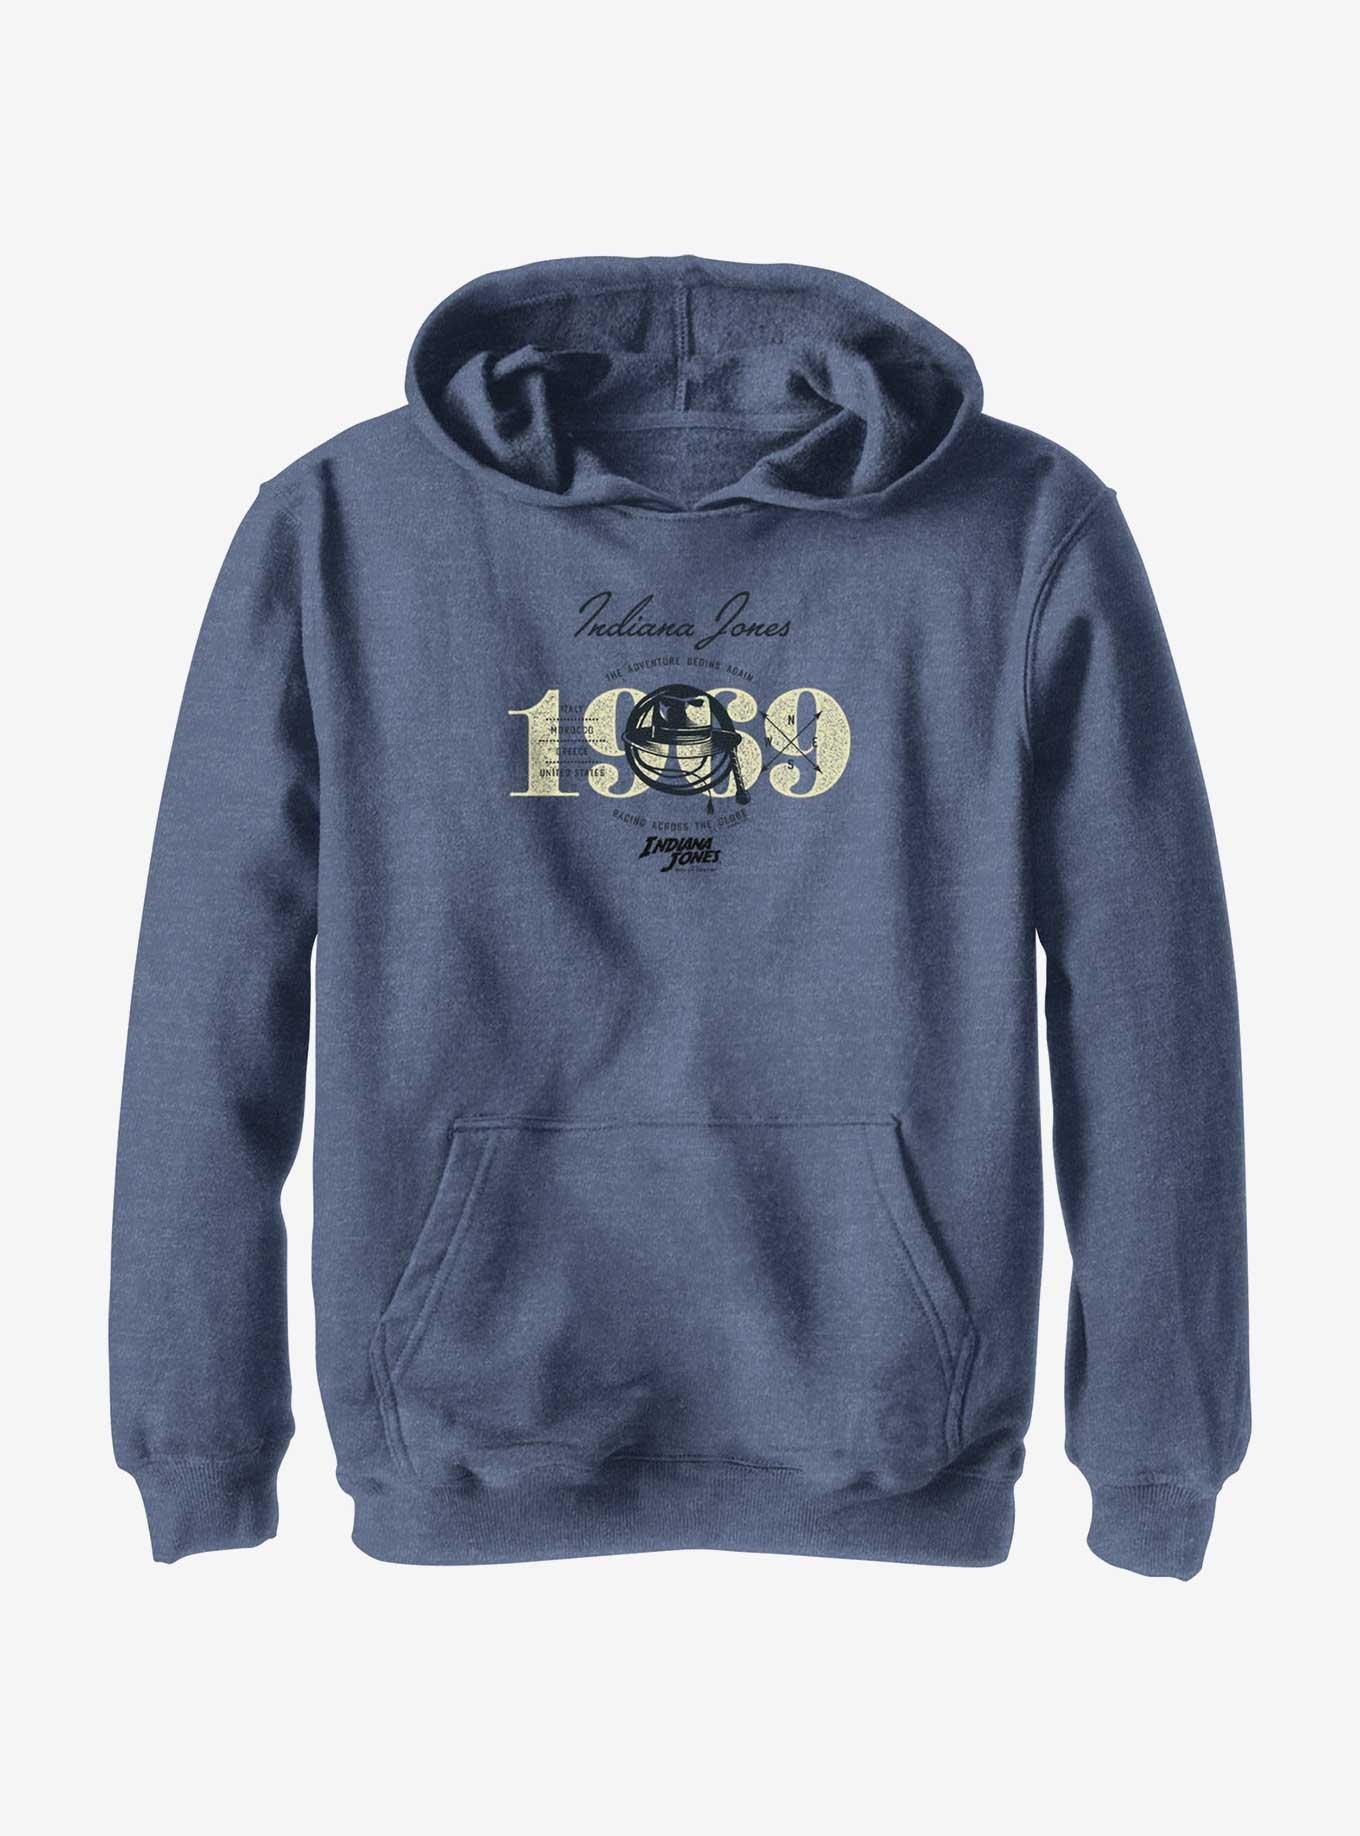 Indiana Jones and the Dial of Destiny 1969 Adventure Begins Again Youth Hoodie, NAVY HTR, hi-res